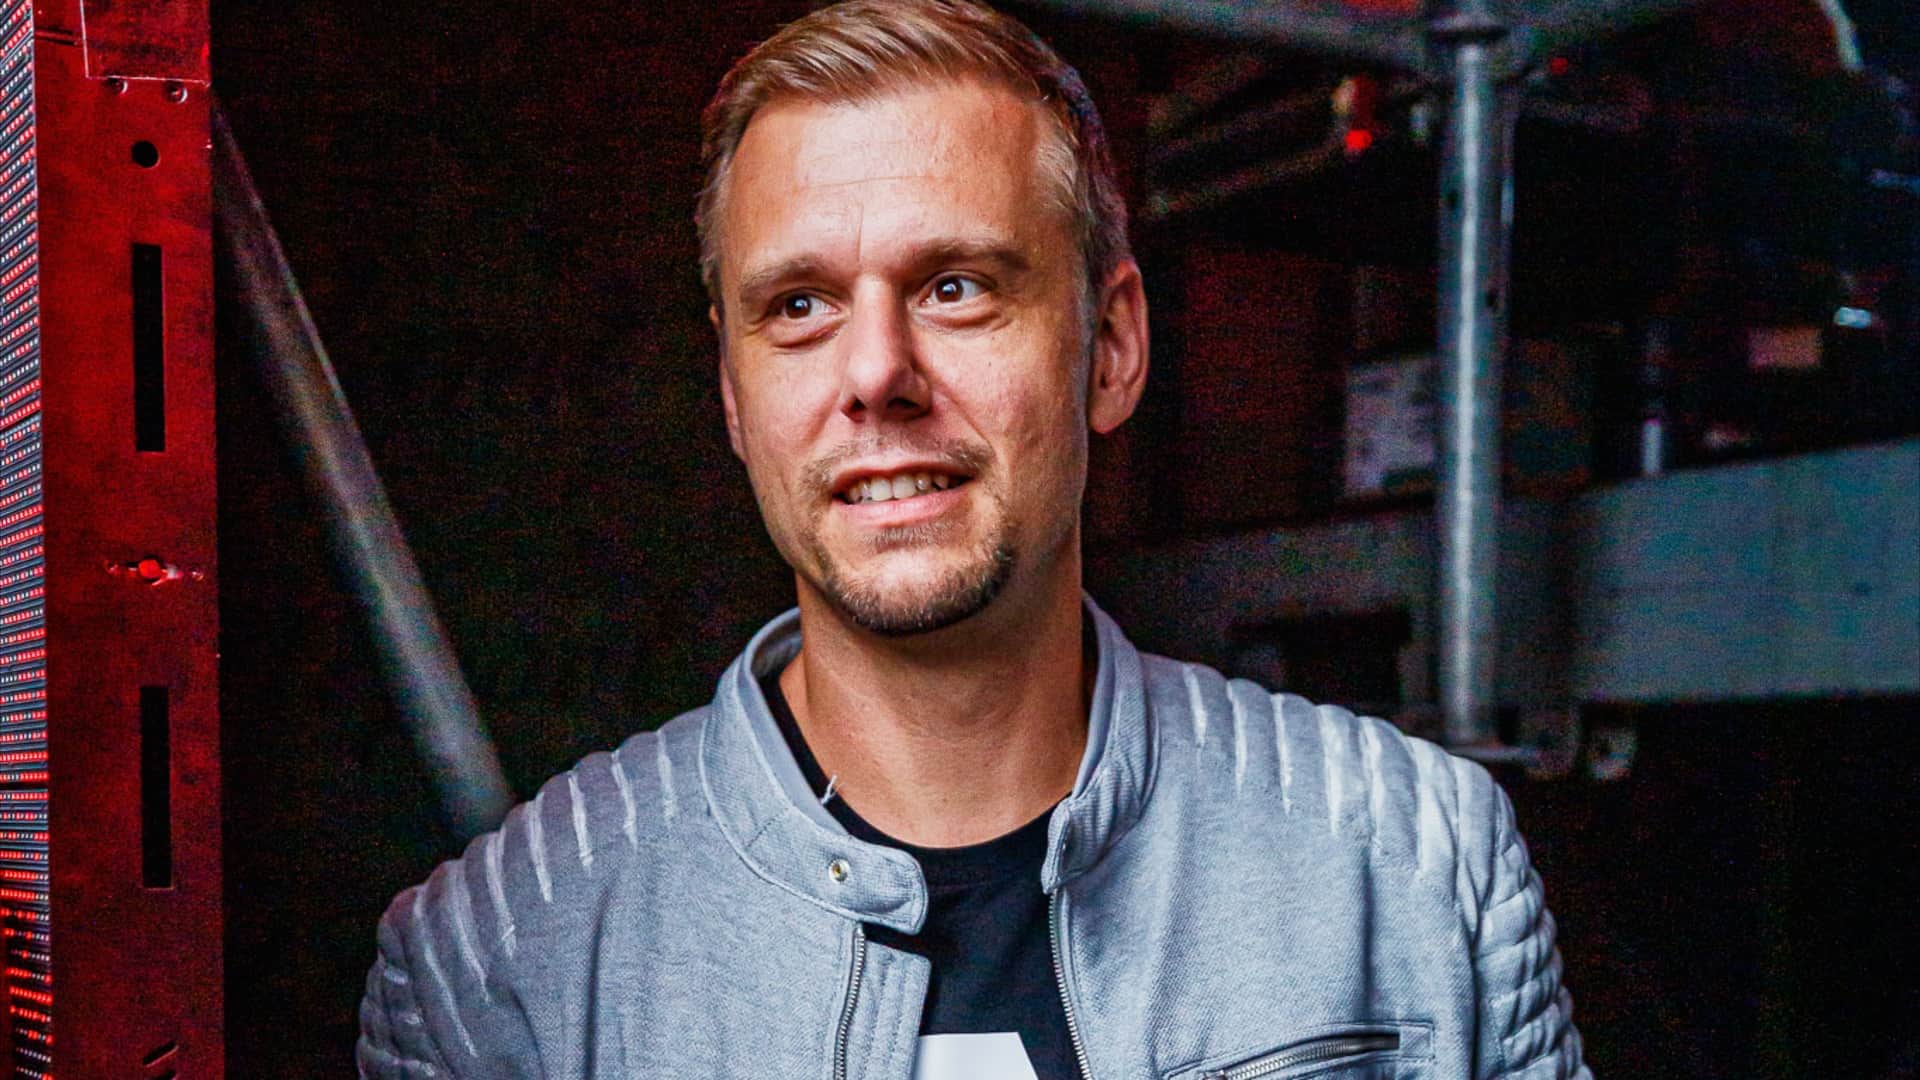 Armin van Buuren drops collab-packed album 'A State Of Trance FOREVER': Listen